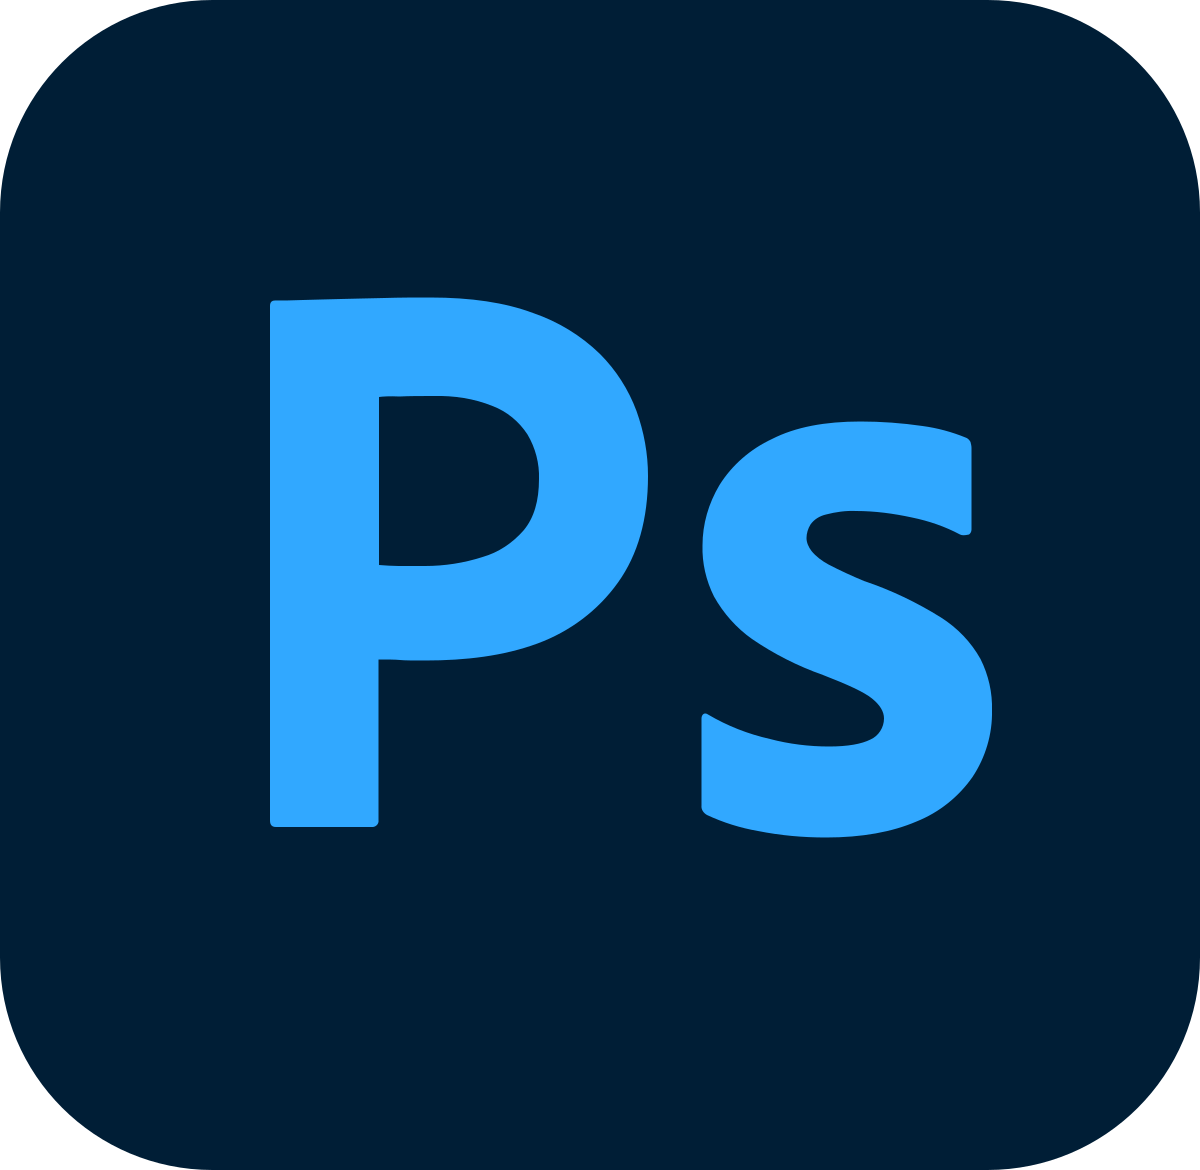 phoexport for mac from windows photoshop